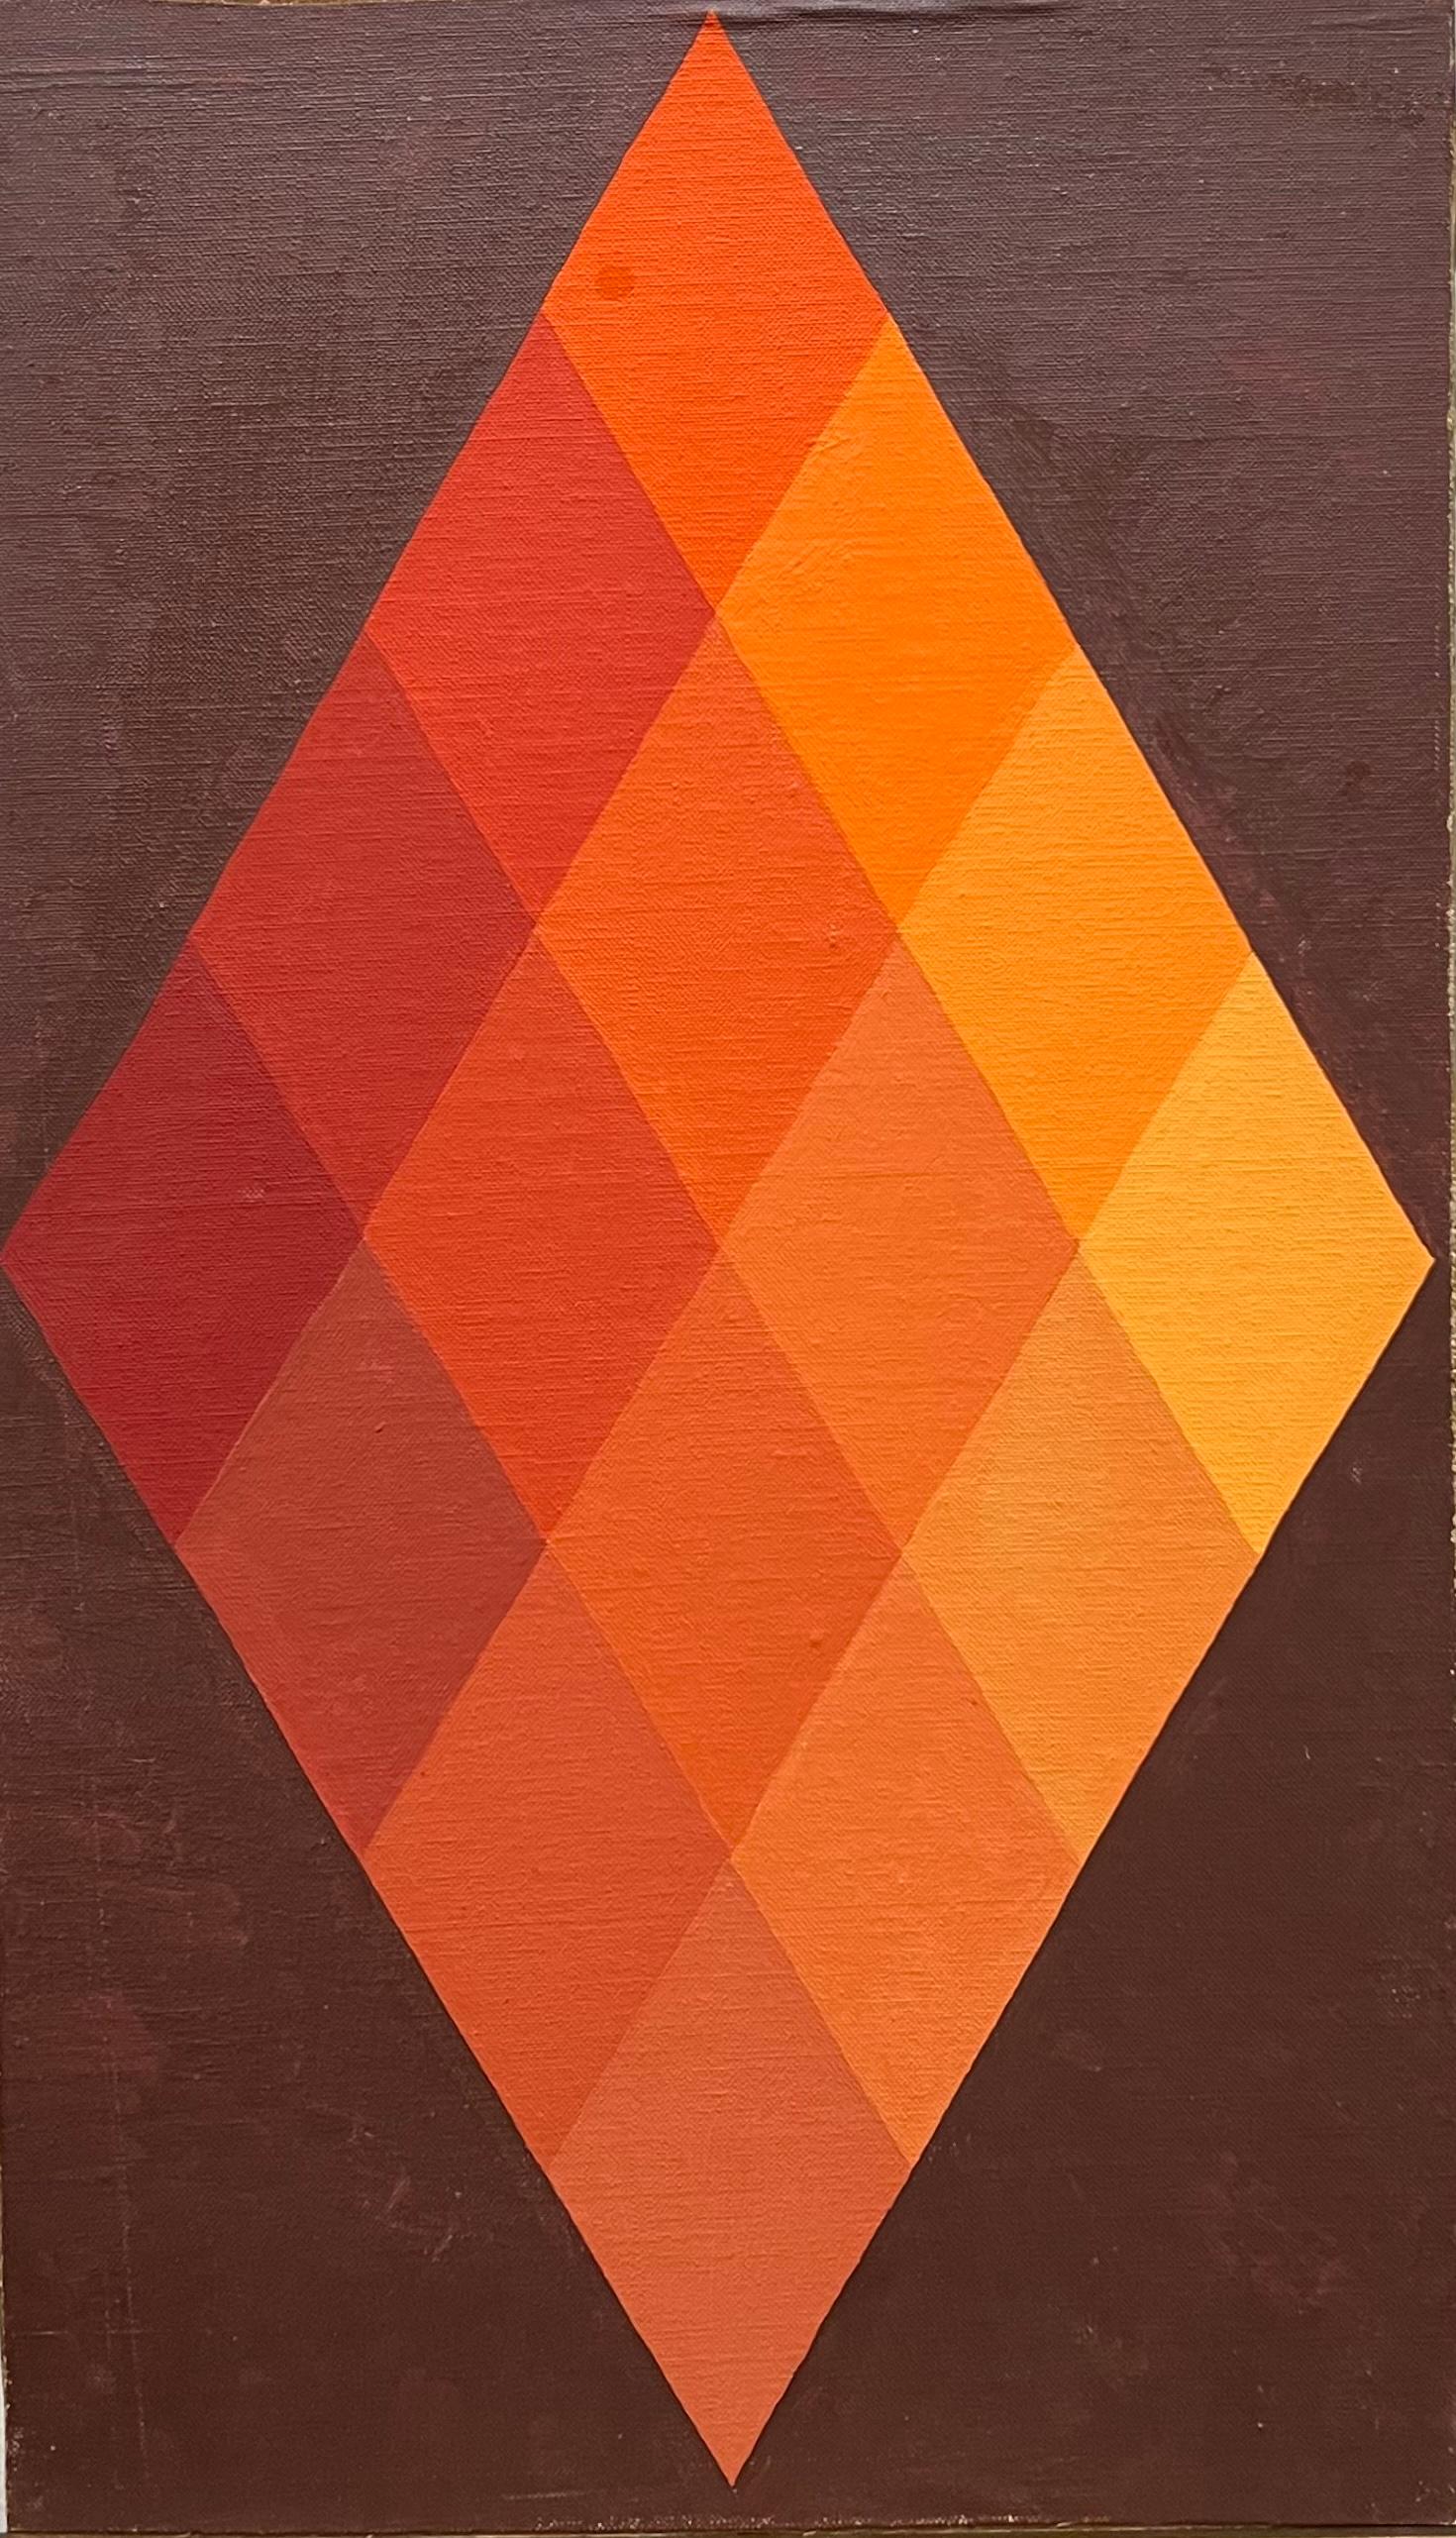 1968 Abstract Geometric Painting “Six Dimensions of Orange” For Sale 1